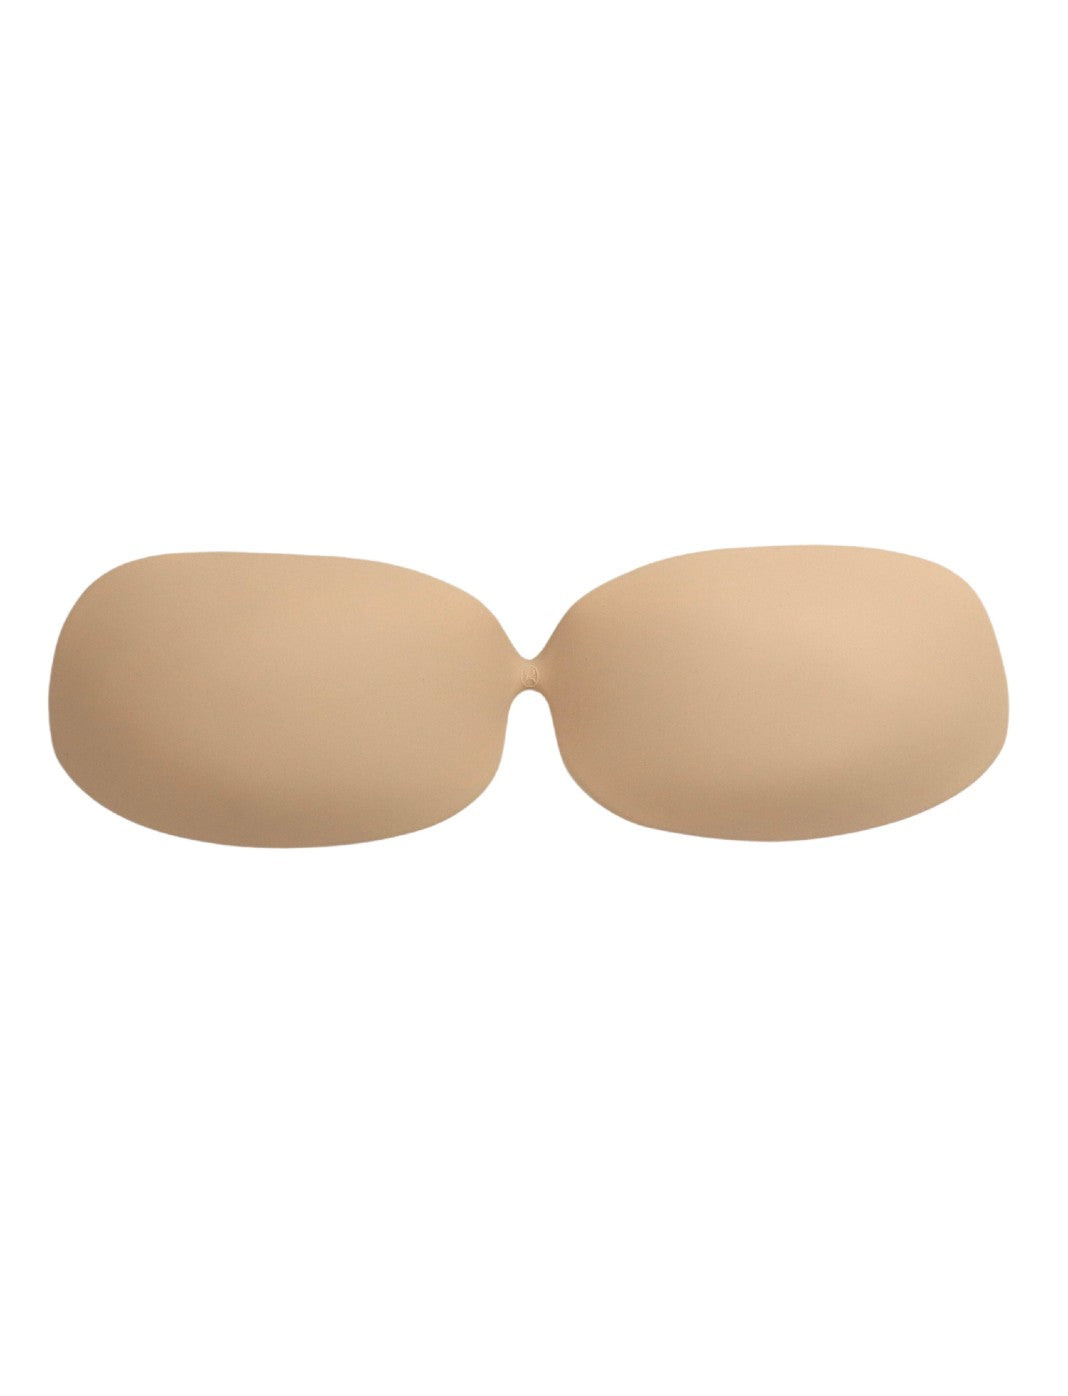 Strapless Bras with lift?, Weddings, Planning, Wedding Forums